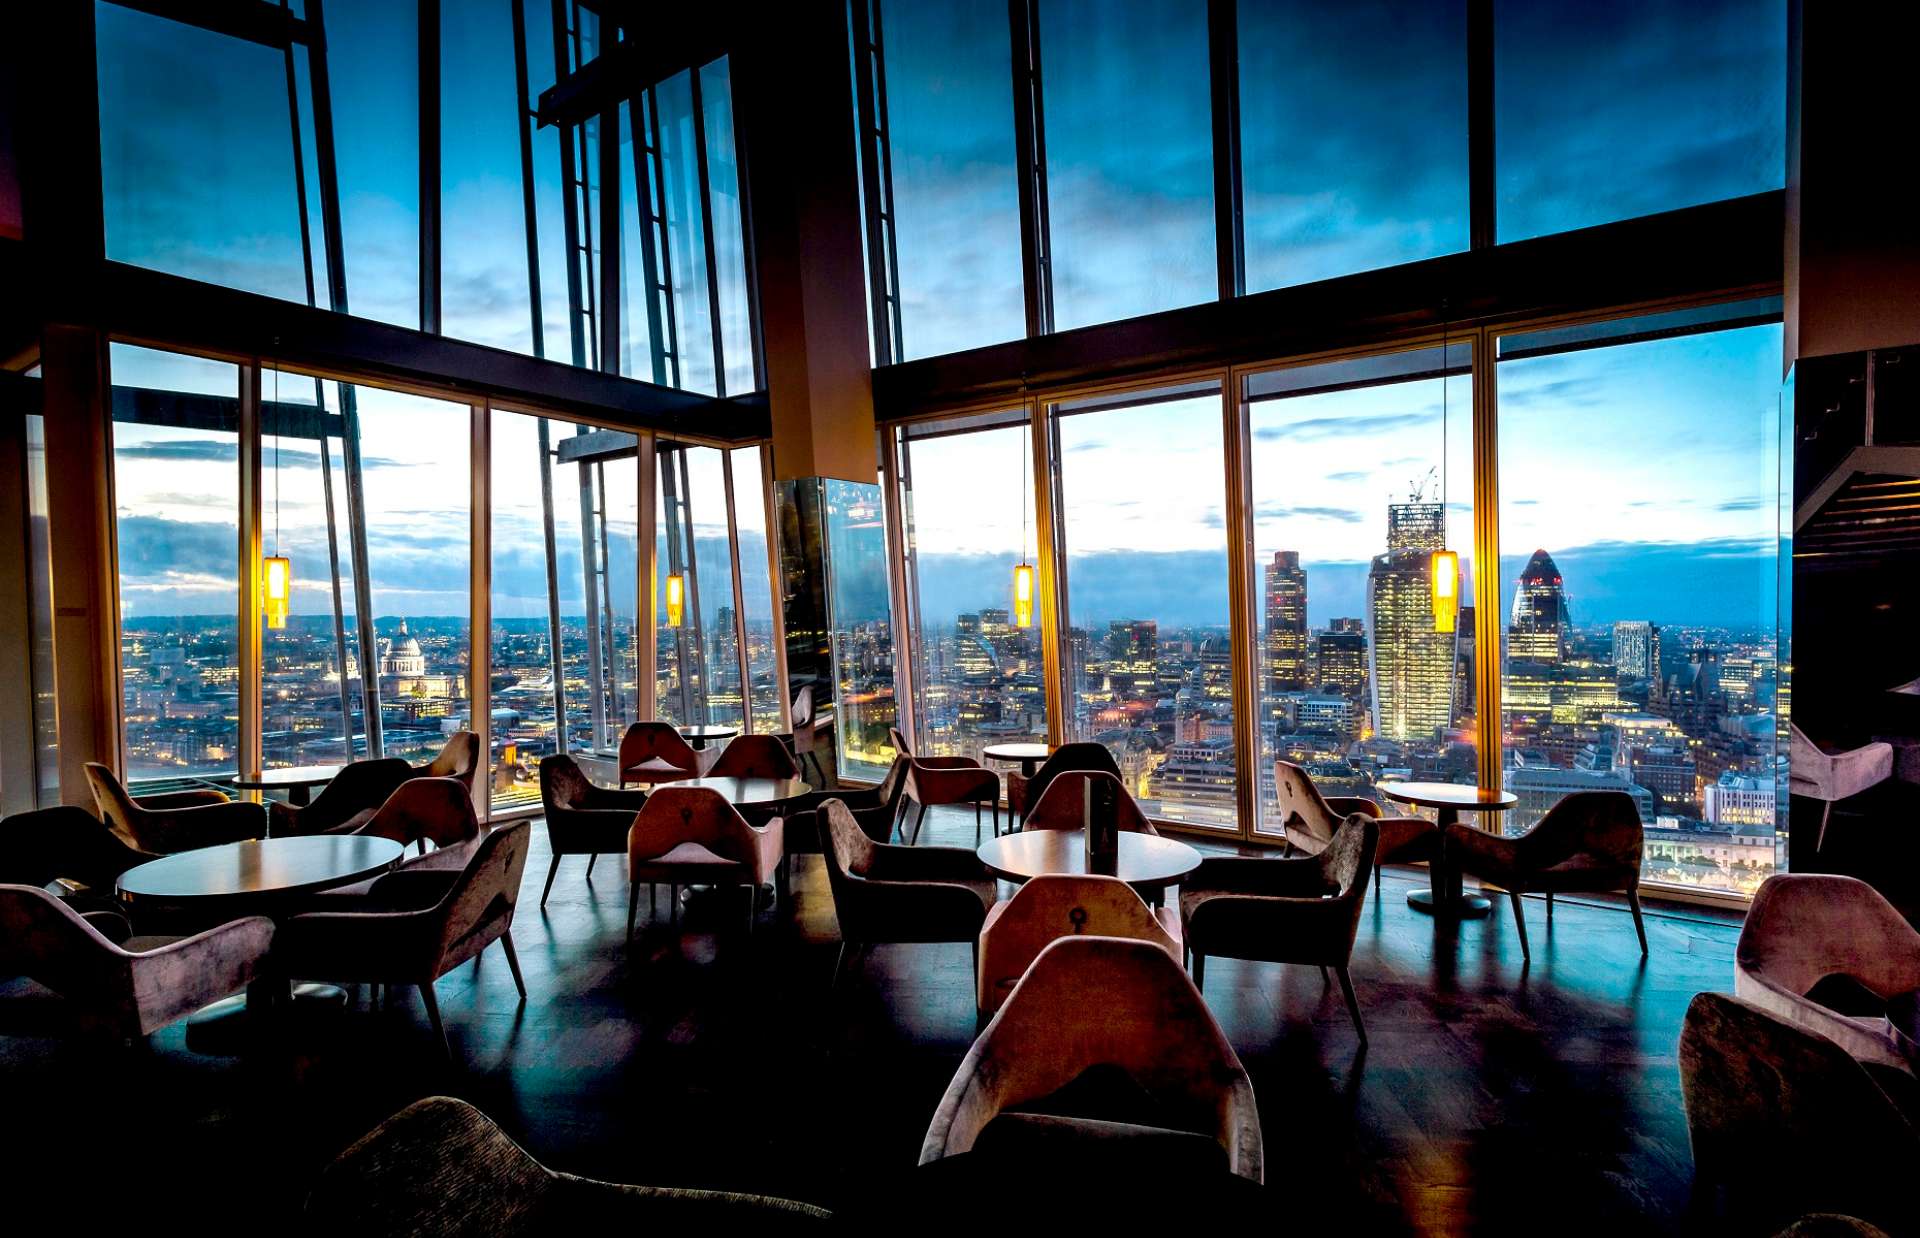 Aqua restaurant group at the Shard will replace Villandry at Great Portland Street in central London